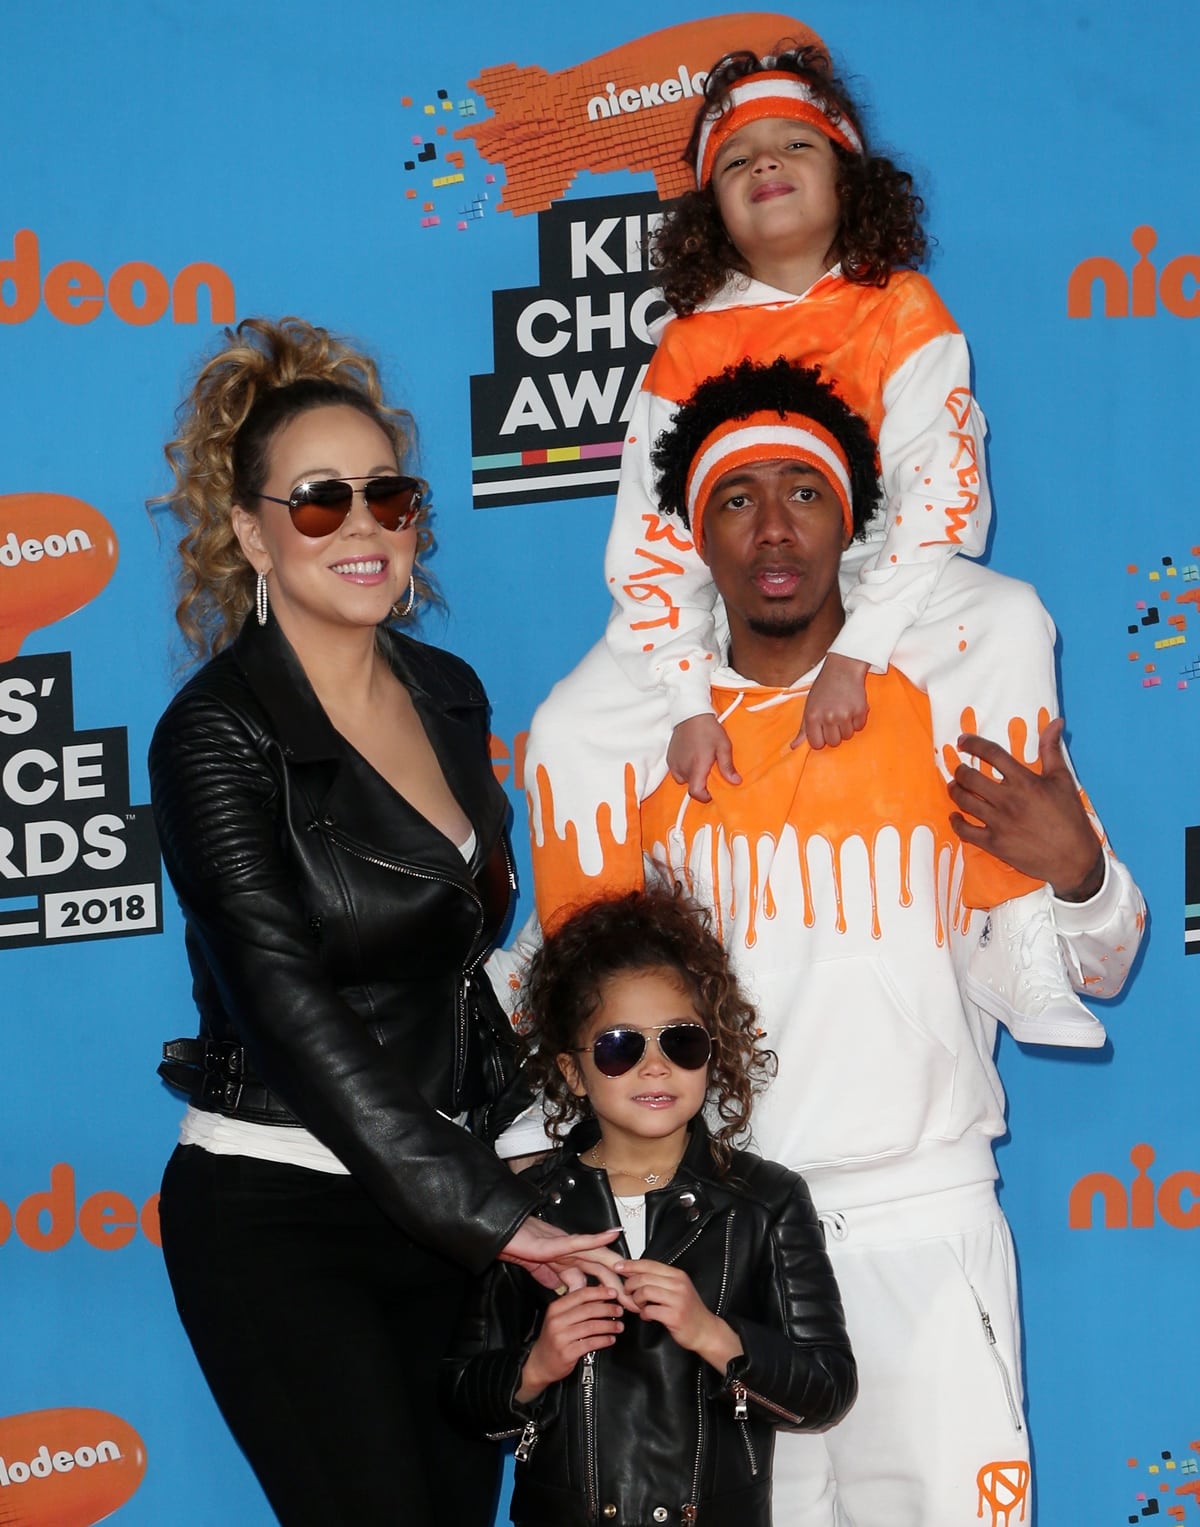 Nick Cannon has seven kids with four women, including Mariah Carey